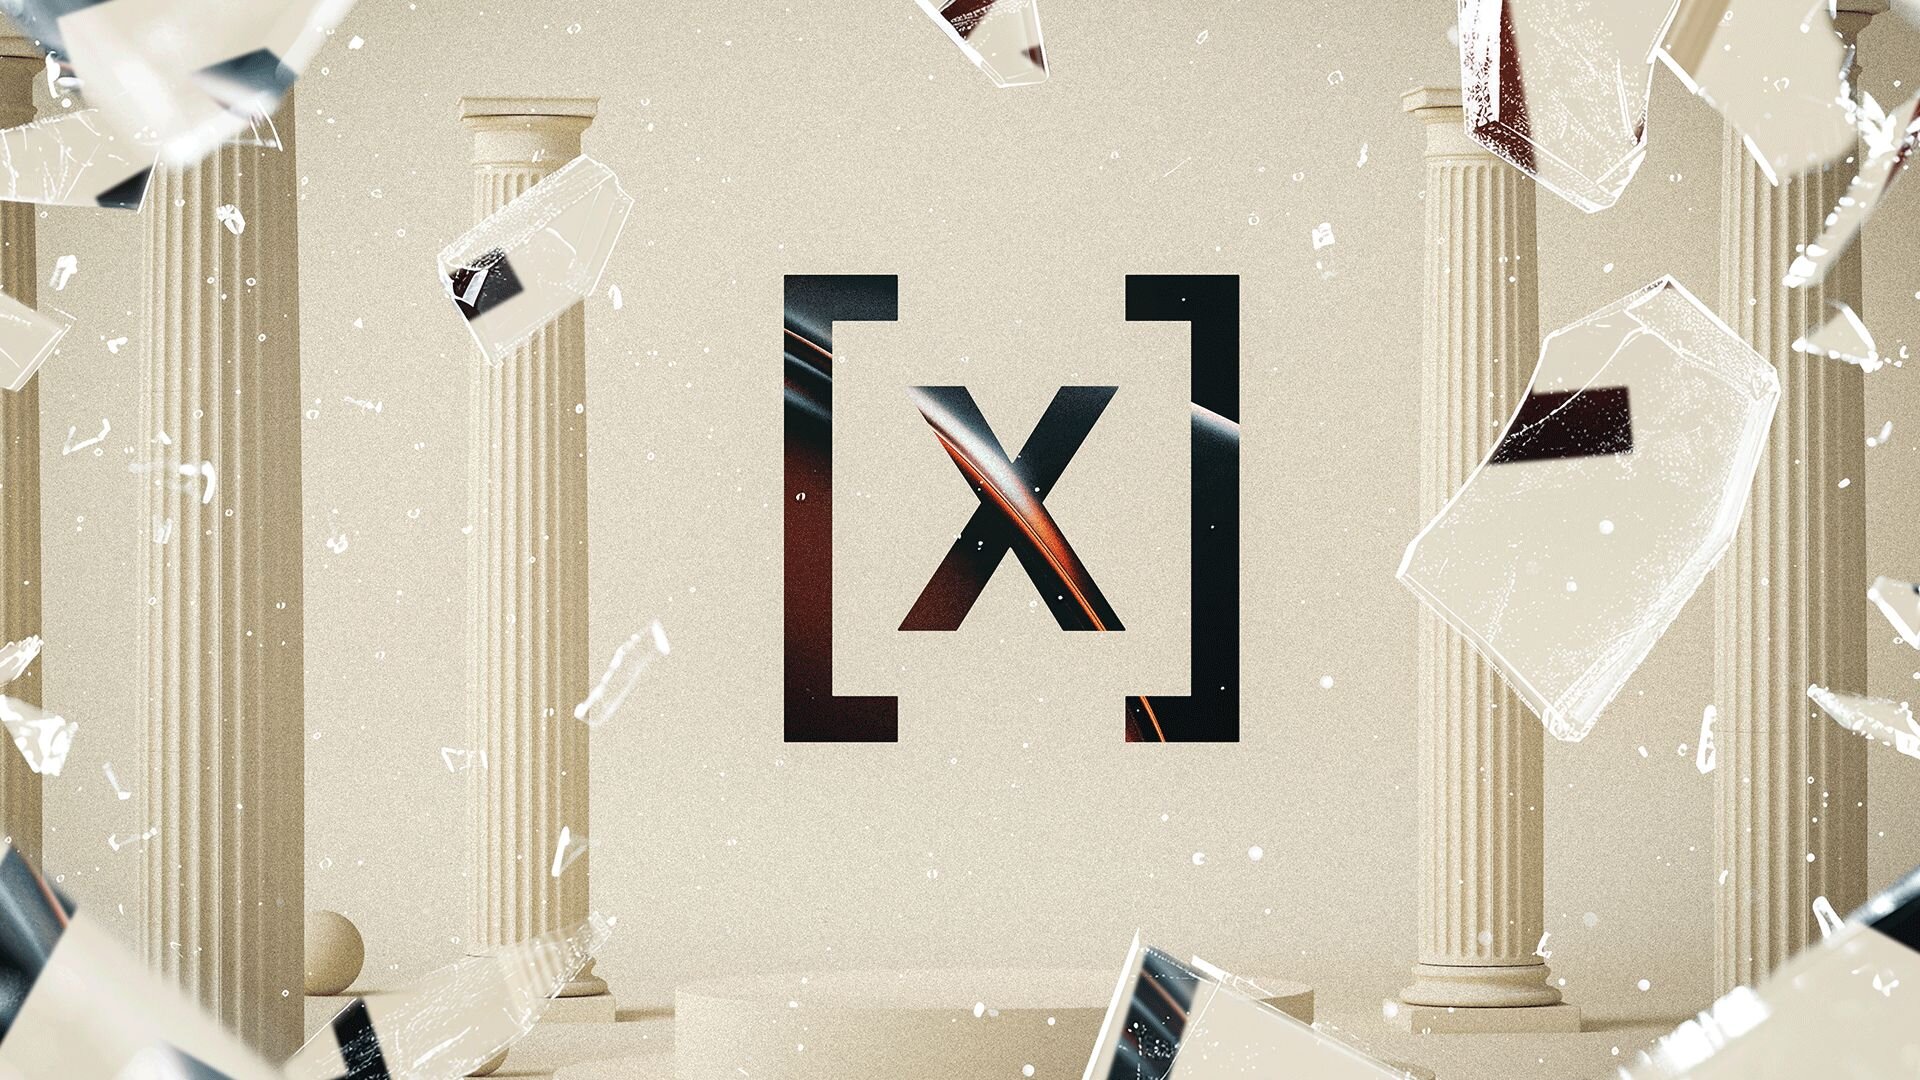 In the foreground, the Human X logo is shown shattering a pane of glass, with fragments scattering outward. Behind the glass, Greek columns are partially visible, suggesting a classical setting. The background features creamy off-white tones, creating a contrast with the dynamic action in the foreground. This imagery symbolizes breaking through traditional industry standards and challenging the status quo.